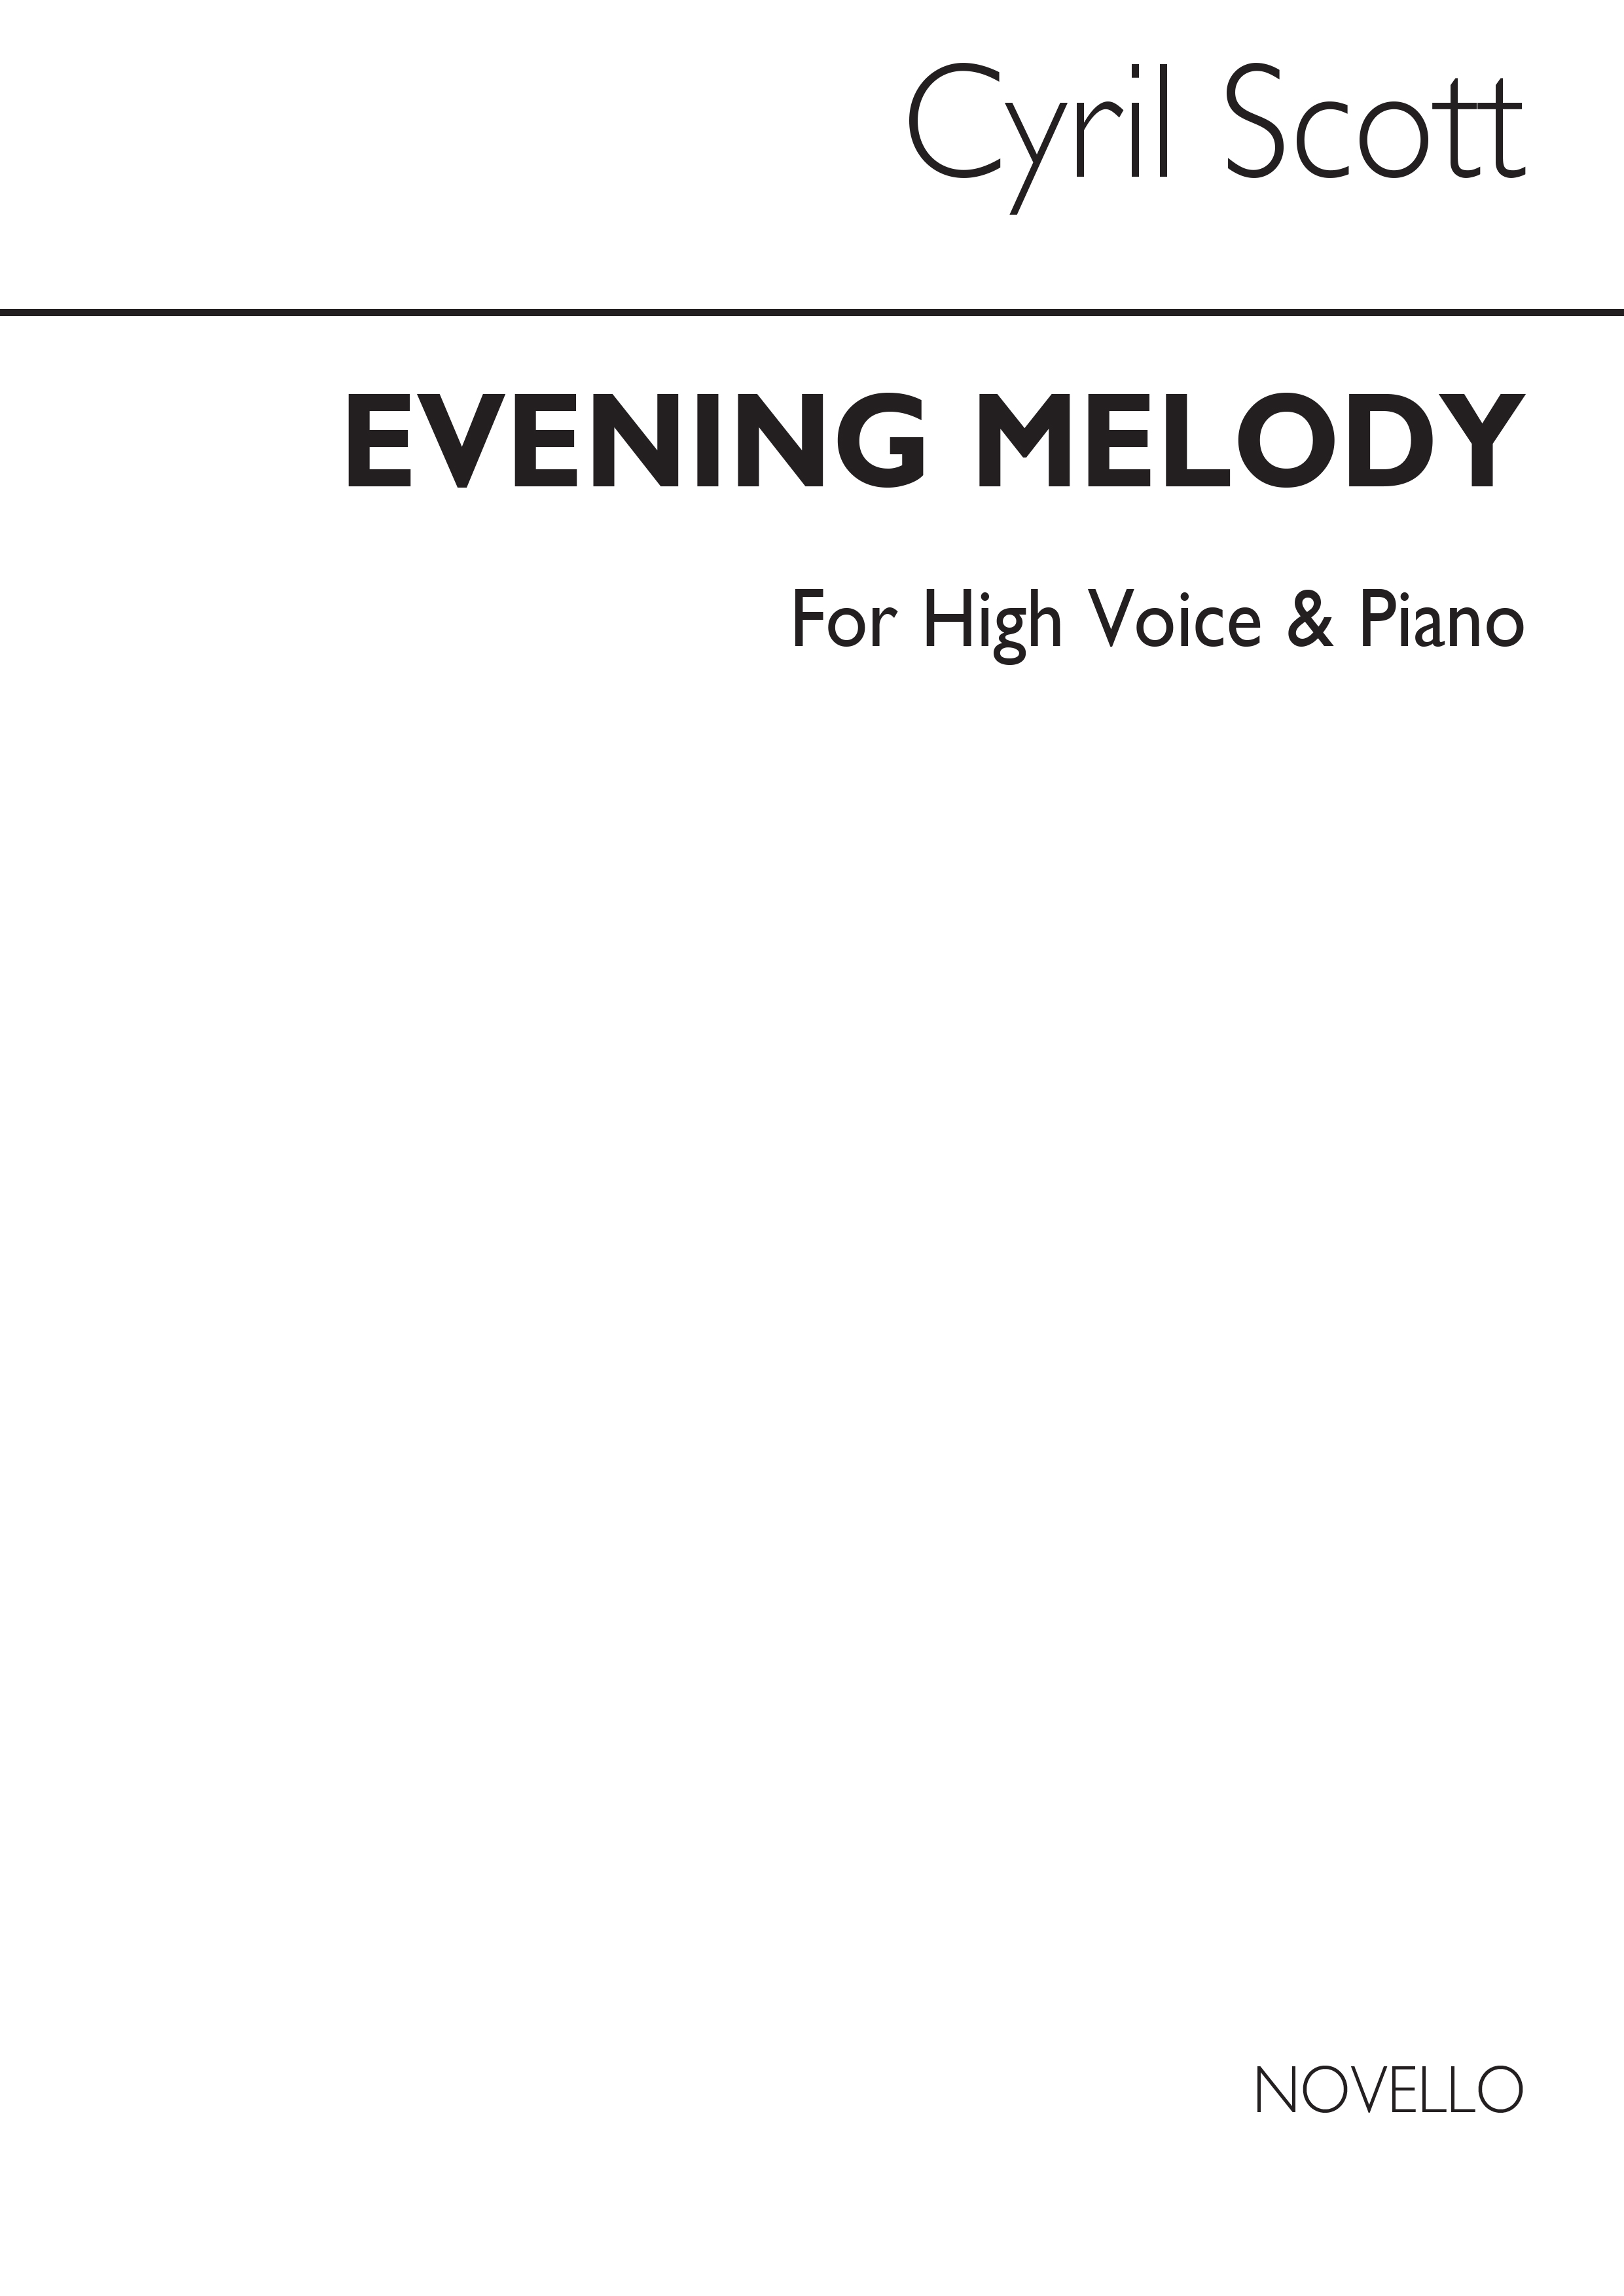 Cyril Scott: Evening Melody-high Voice/Piano